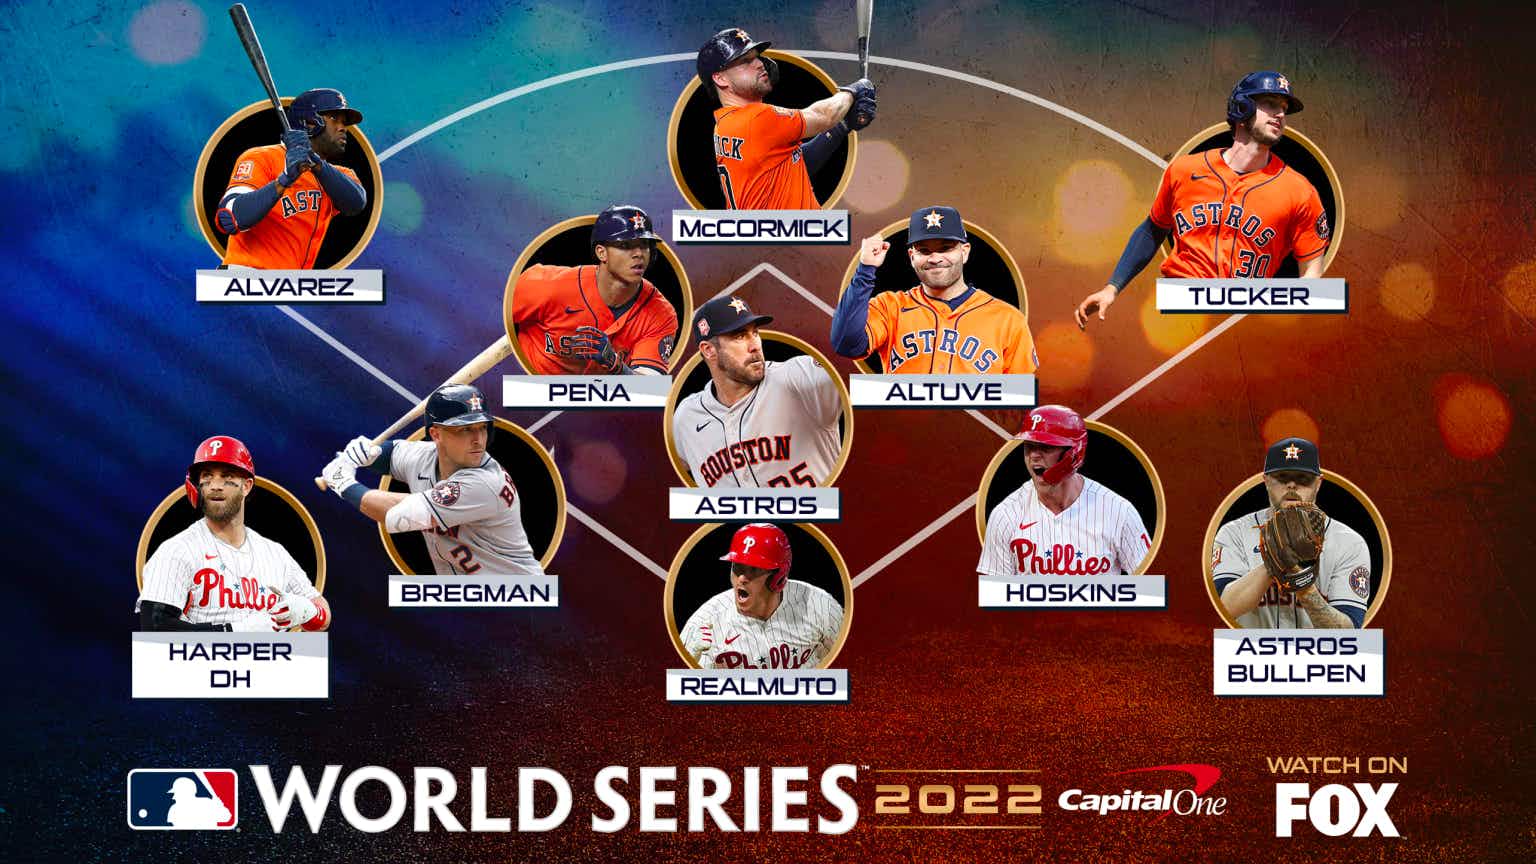 A graphic of baseball players for the World Series